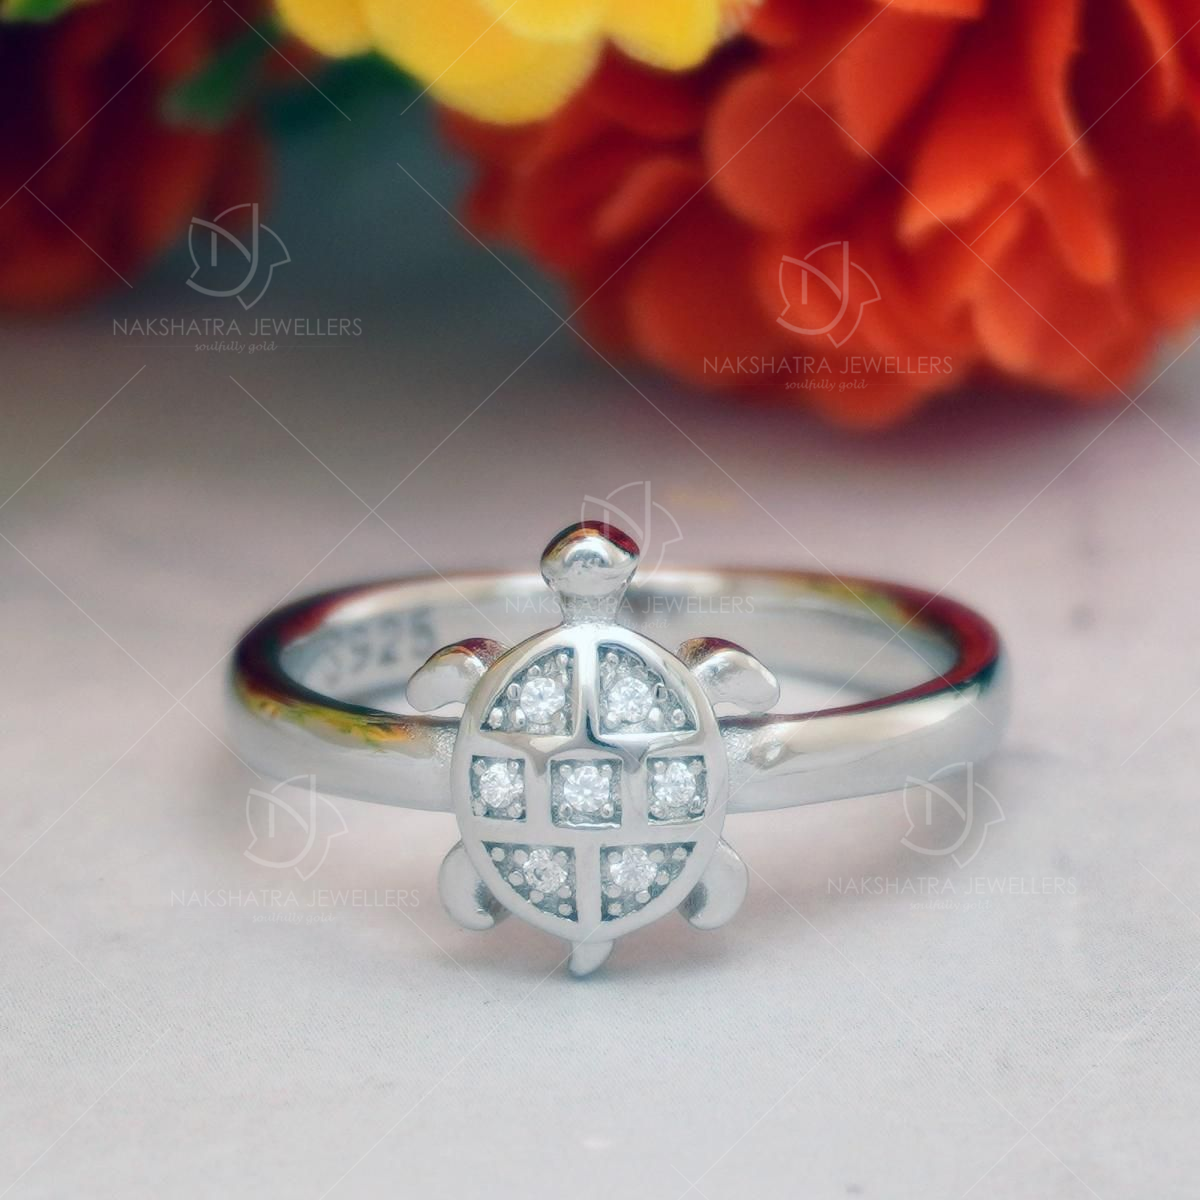 Buy Sterling Silver Tortoise Ring, Baby Turtle Ring, Beach Ring, Silver Ring,  Ocean Ring, Animal Ring Online in India - Etsy